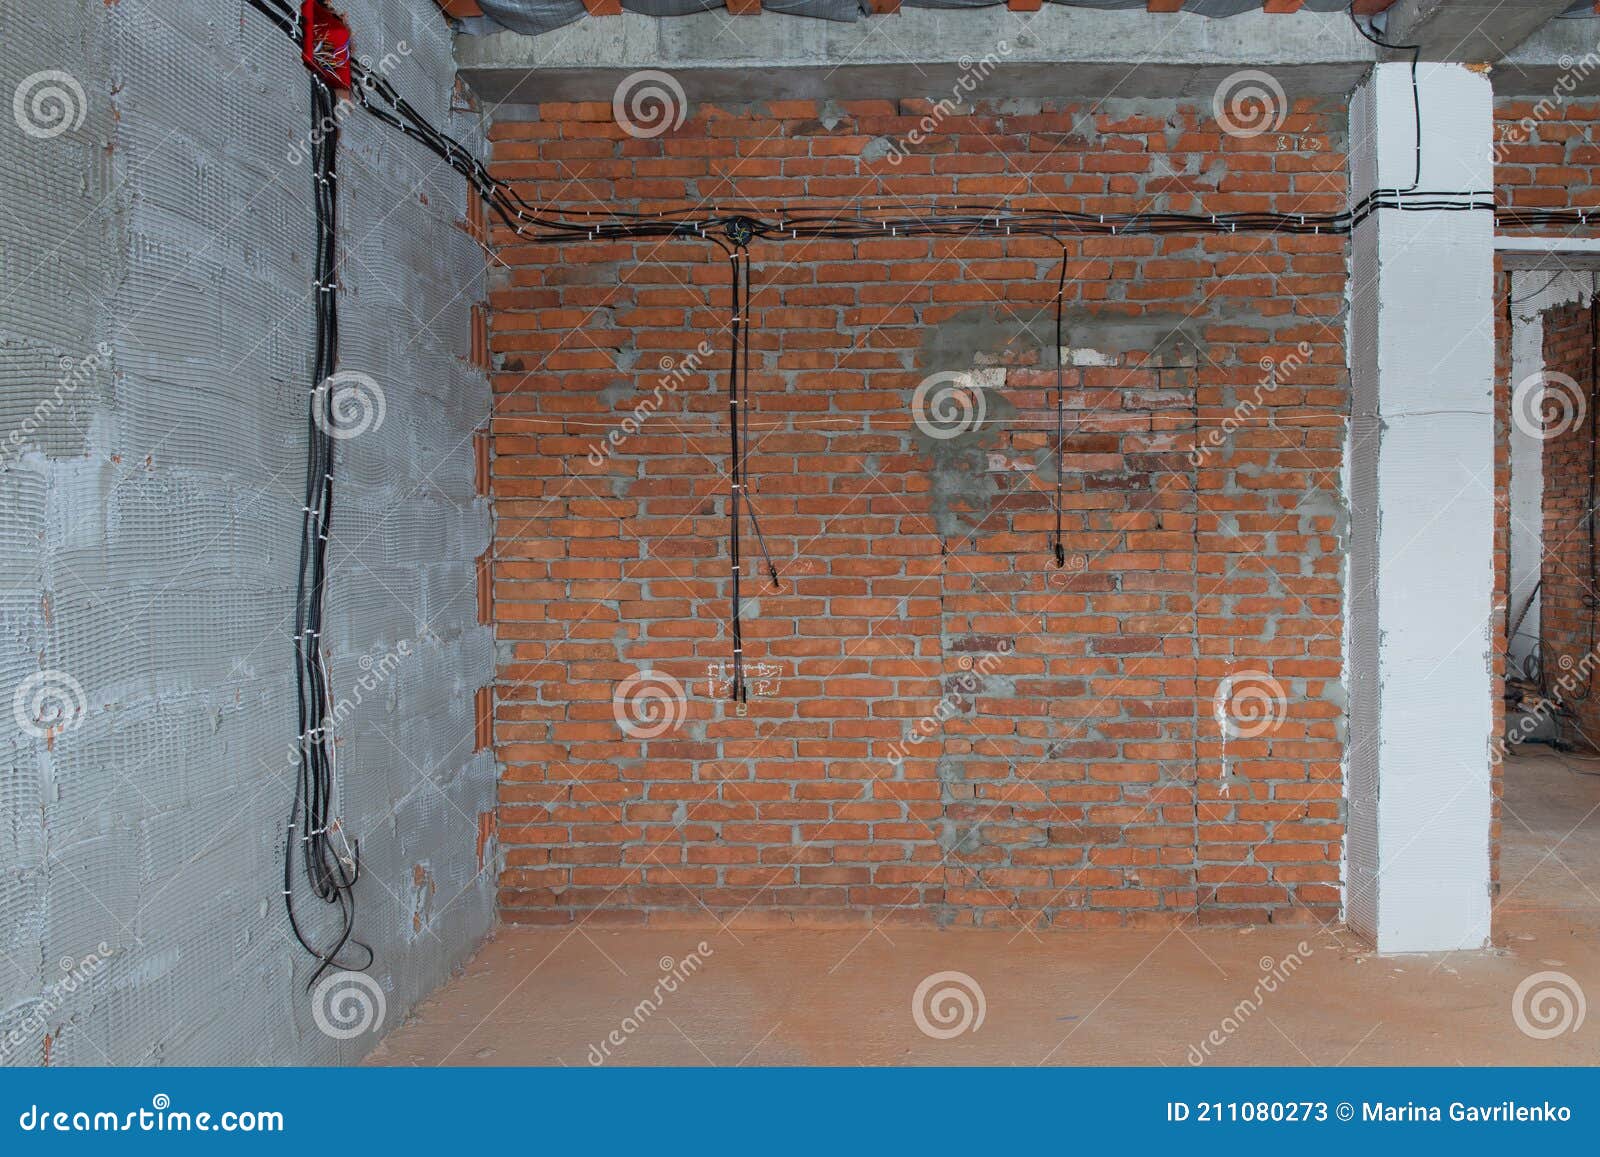 Construction of a New House, Electrical Cables Laid Out on the Brick Walls  According To the Scheme Inside the Room Stock Image - Image of supply,  interior: 211080273